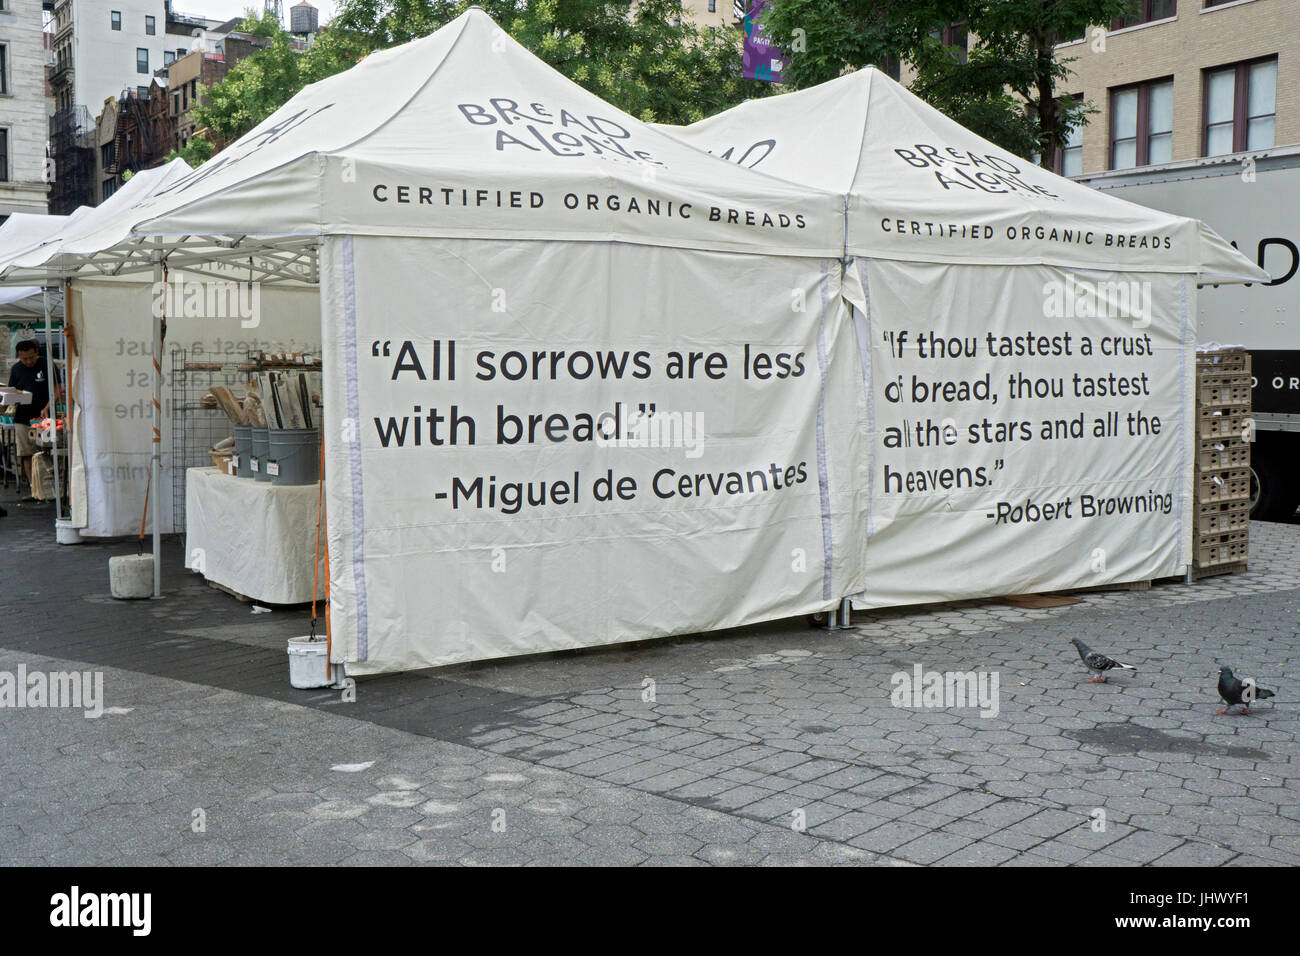 The BREAD ALONE stand at the Union Square Green Market with quotes by Robert Browning and Miguel de Cervantes on their tents. Stock Photo